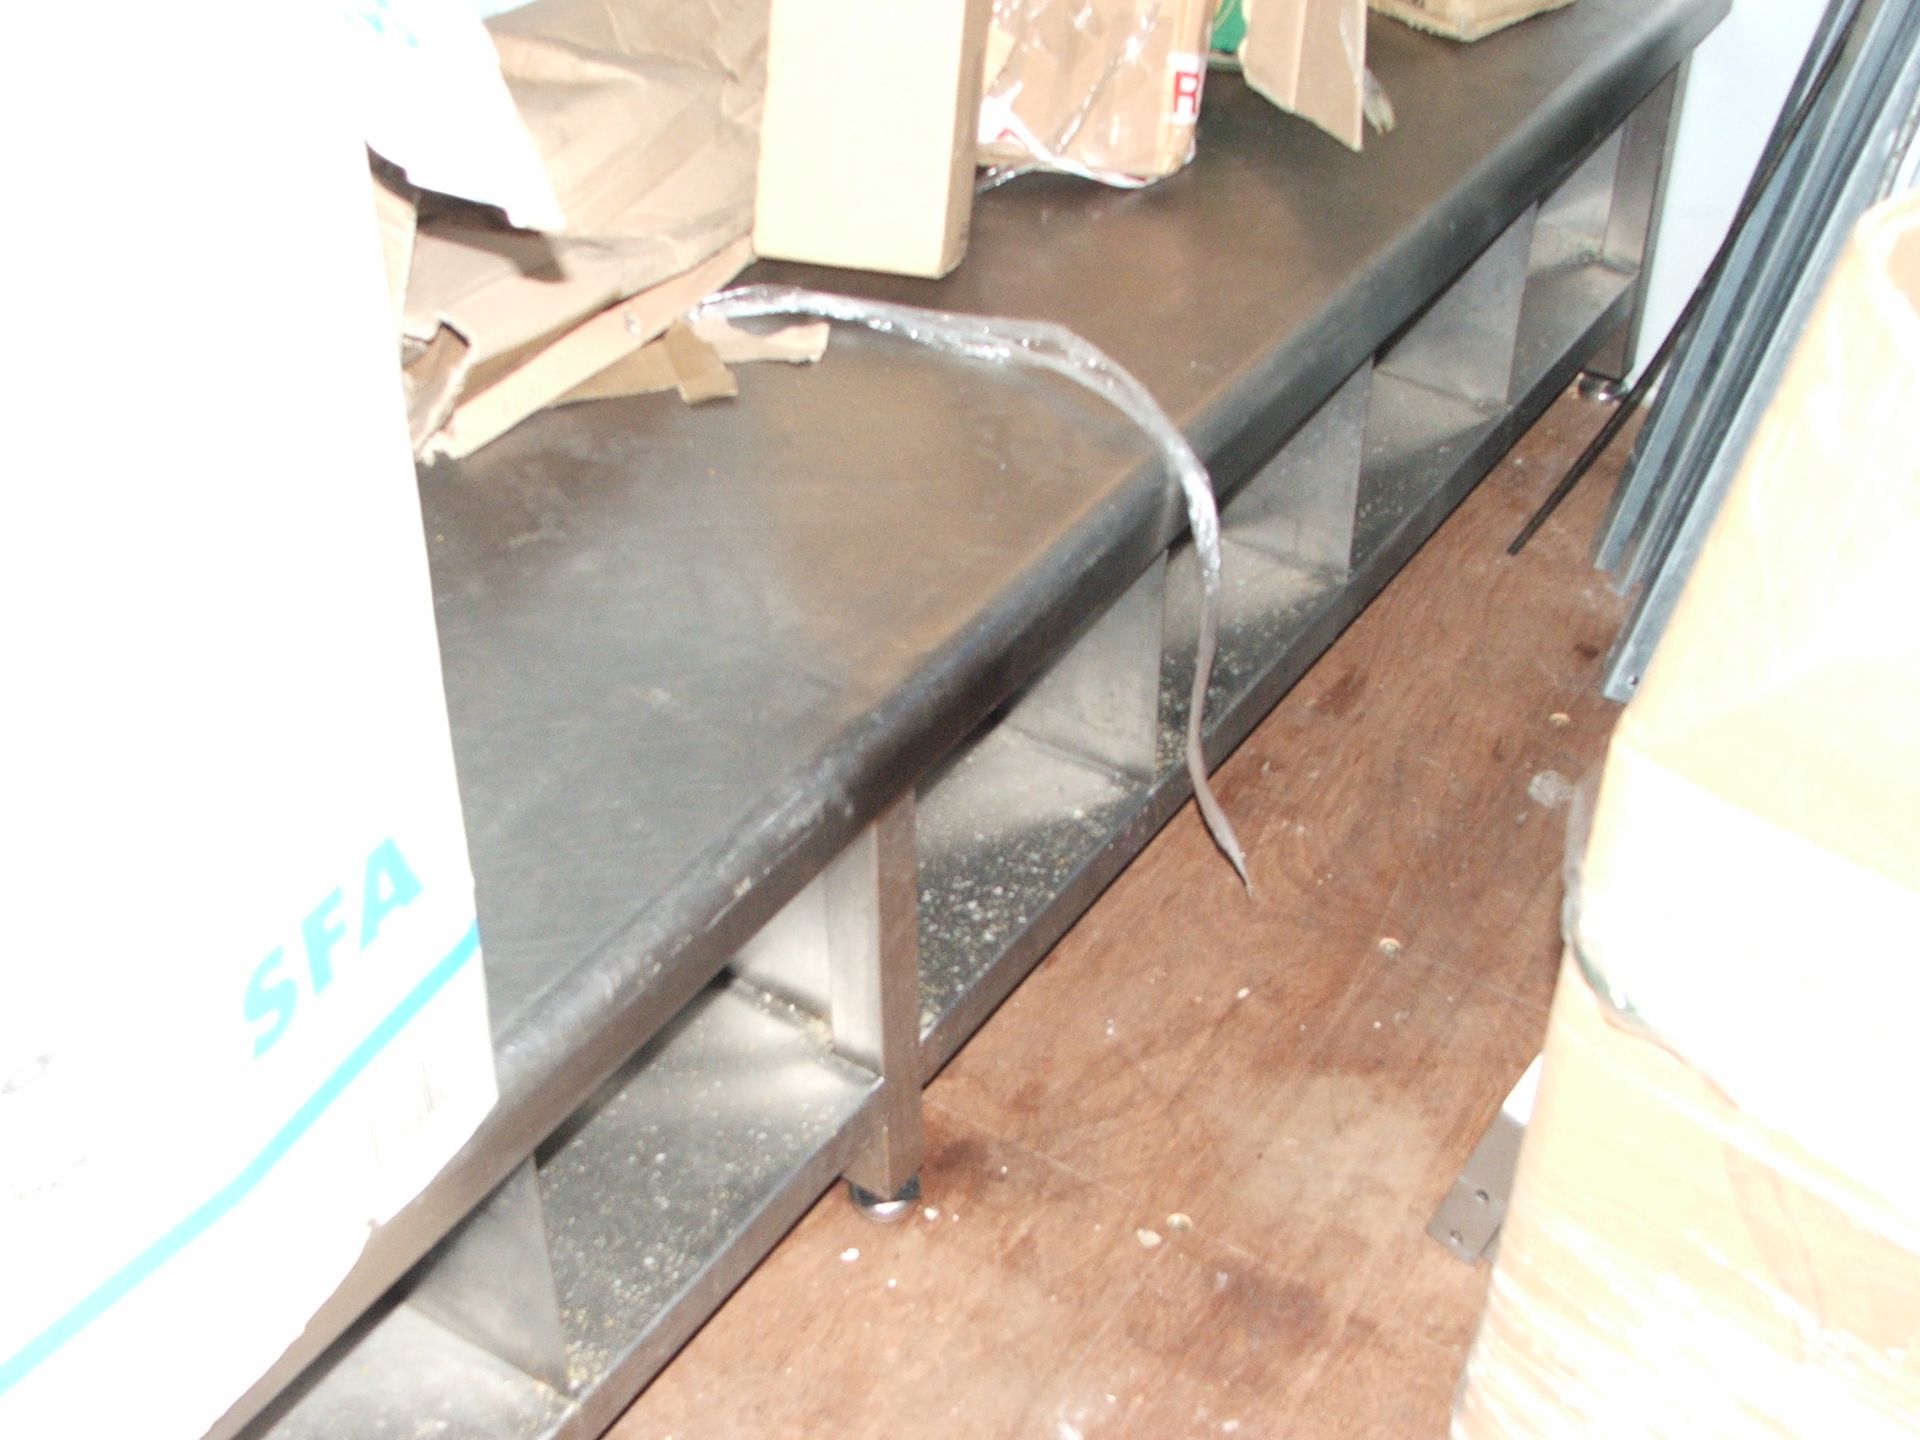 8 MTR LONG S/STEEL LOCKER ROOM BENCH WITH 16 SHOE HOLDERS (8 EACH SIDE) LIFT OUT £15.00